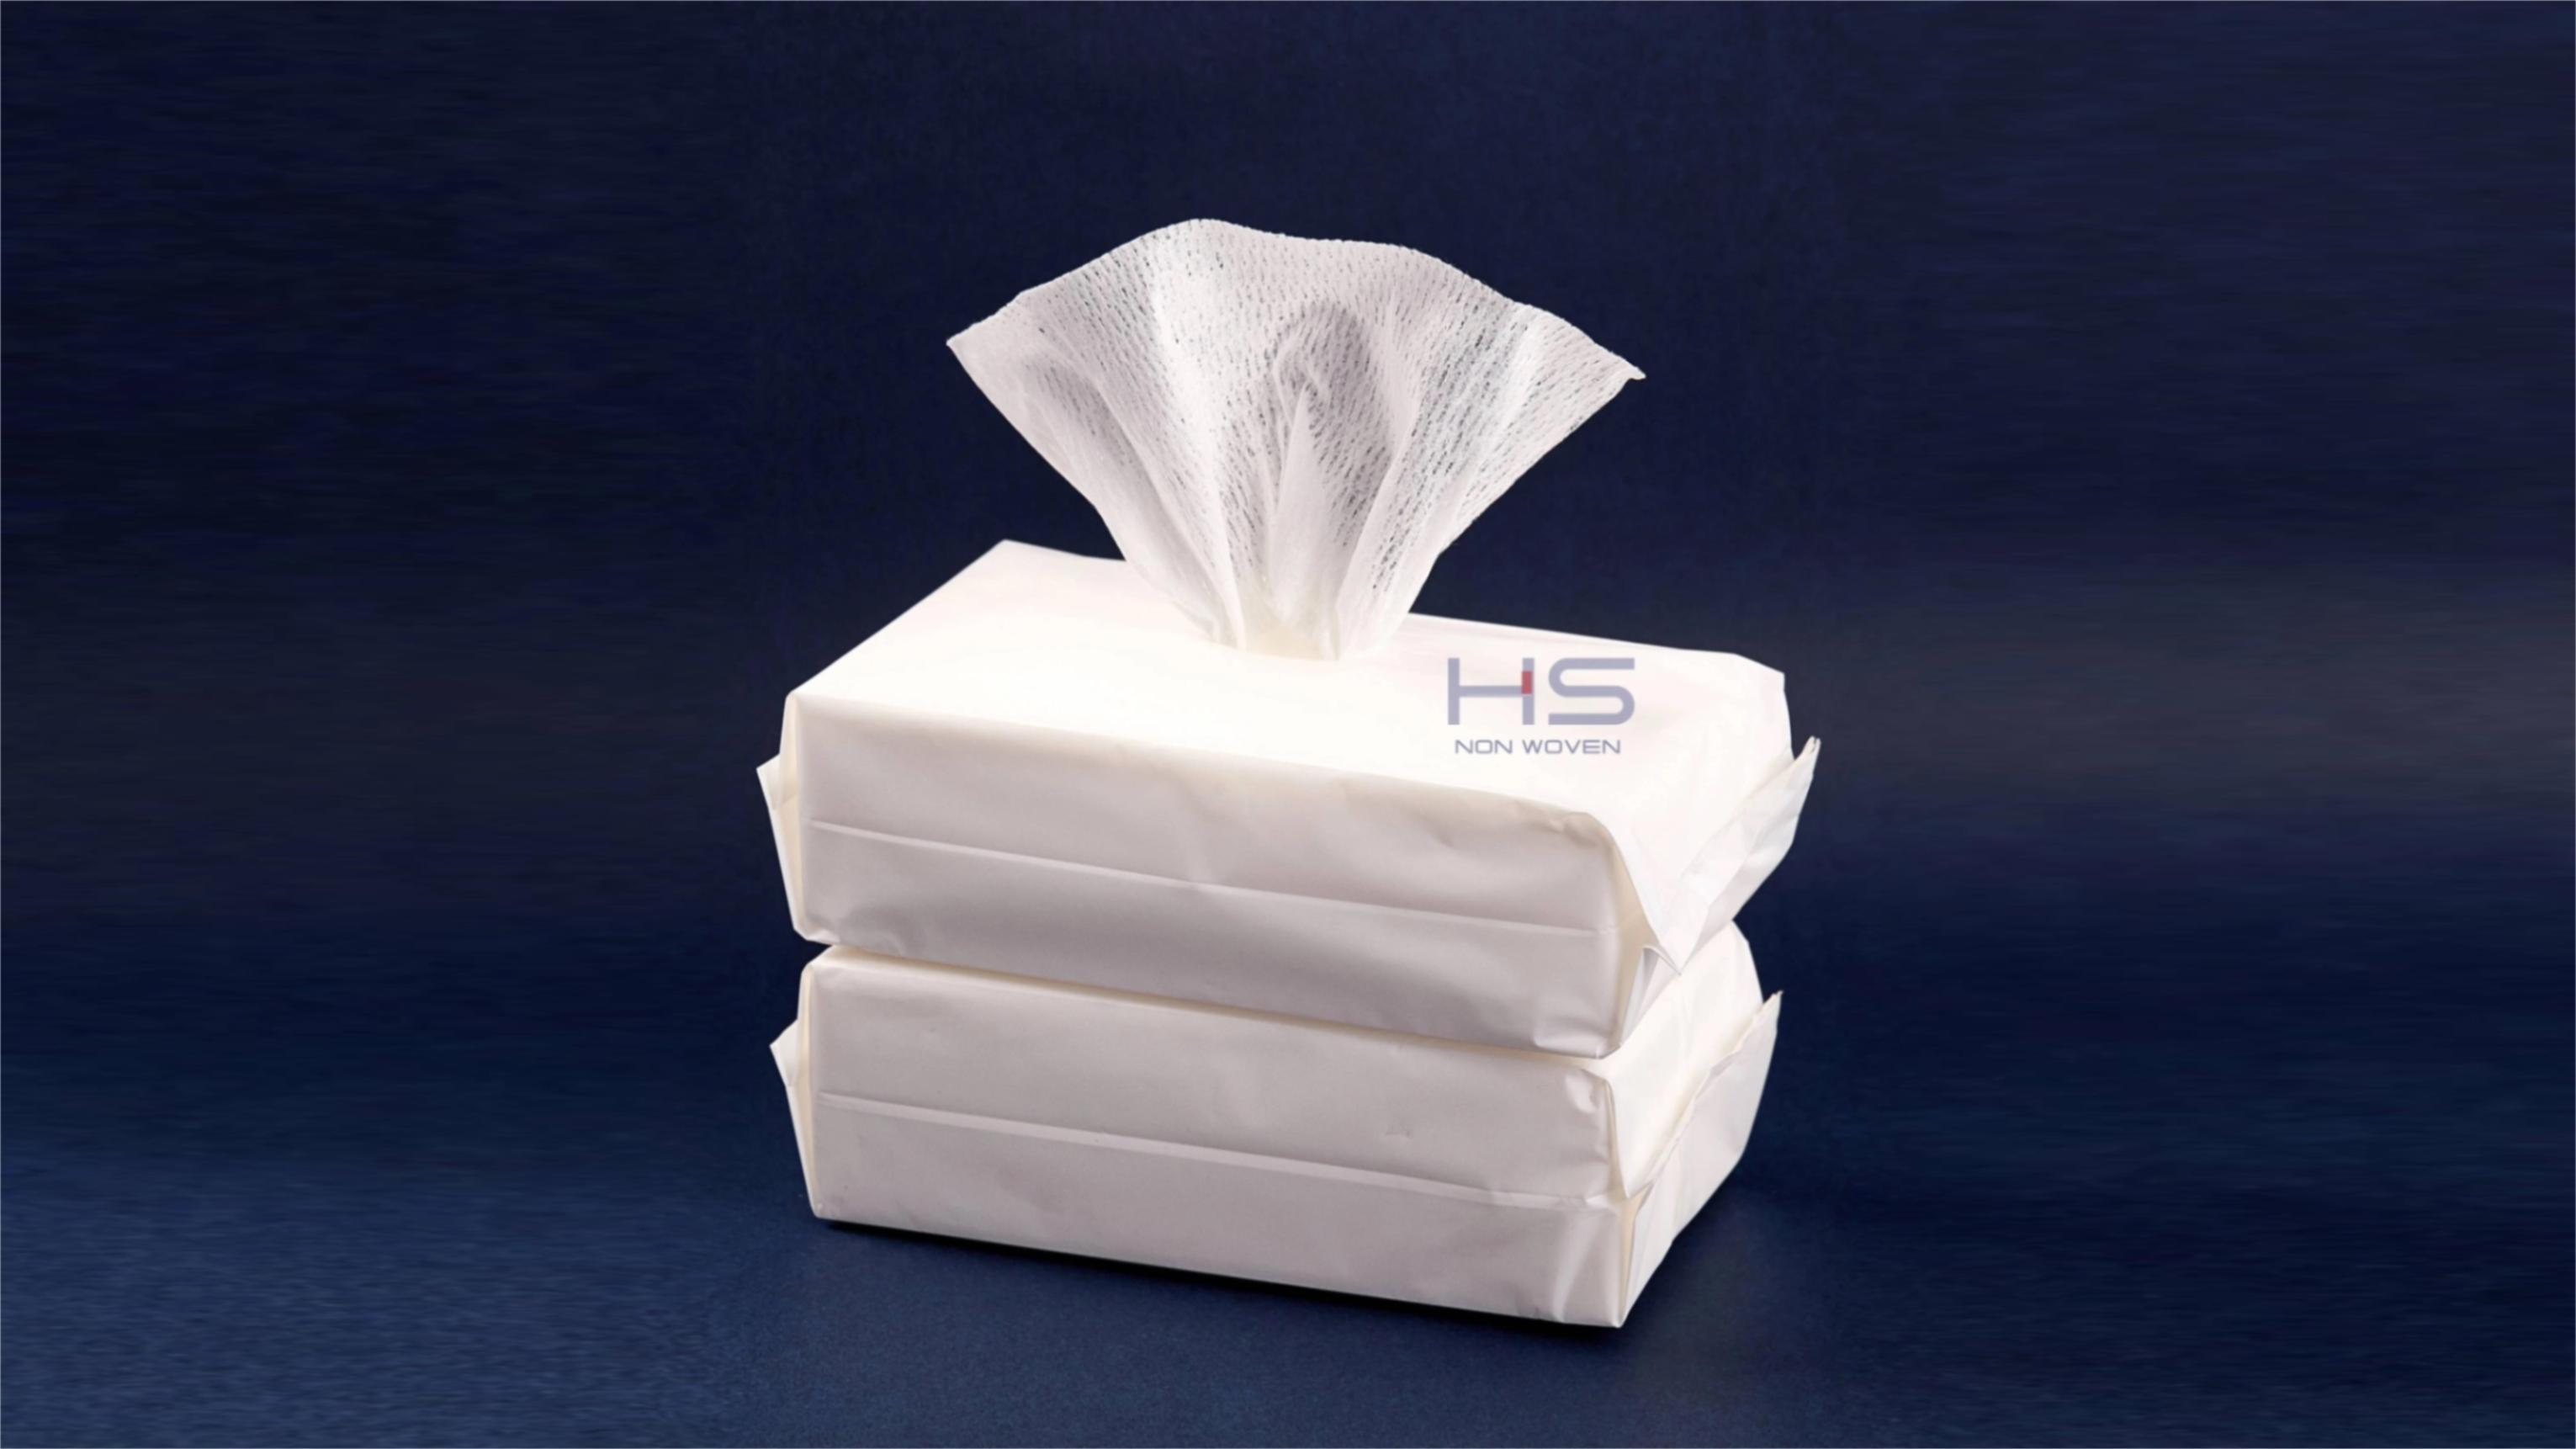 https://www.hsnonowned.com/facial-dry-towel-product/